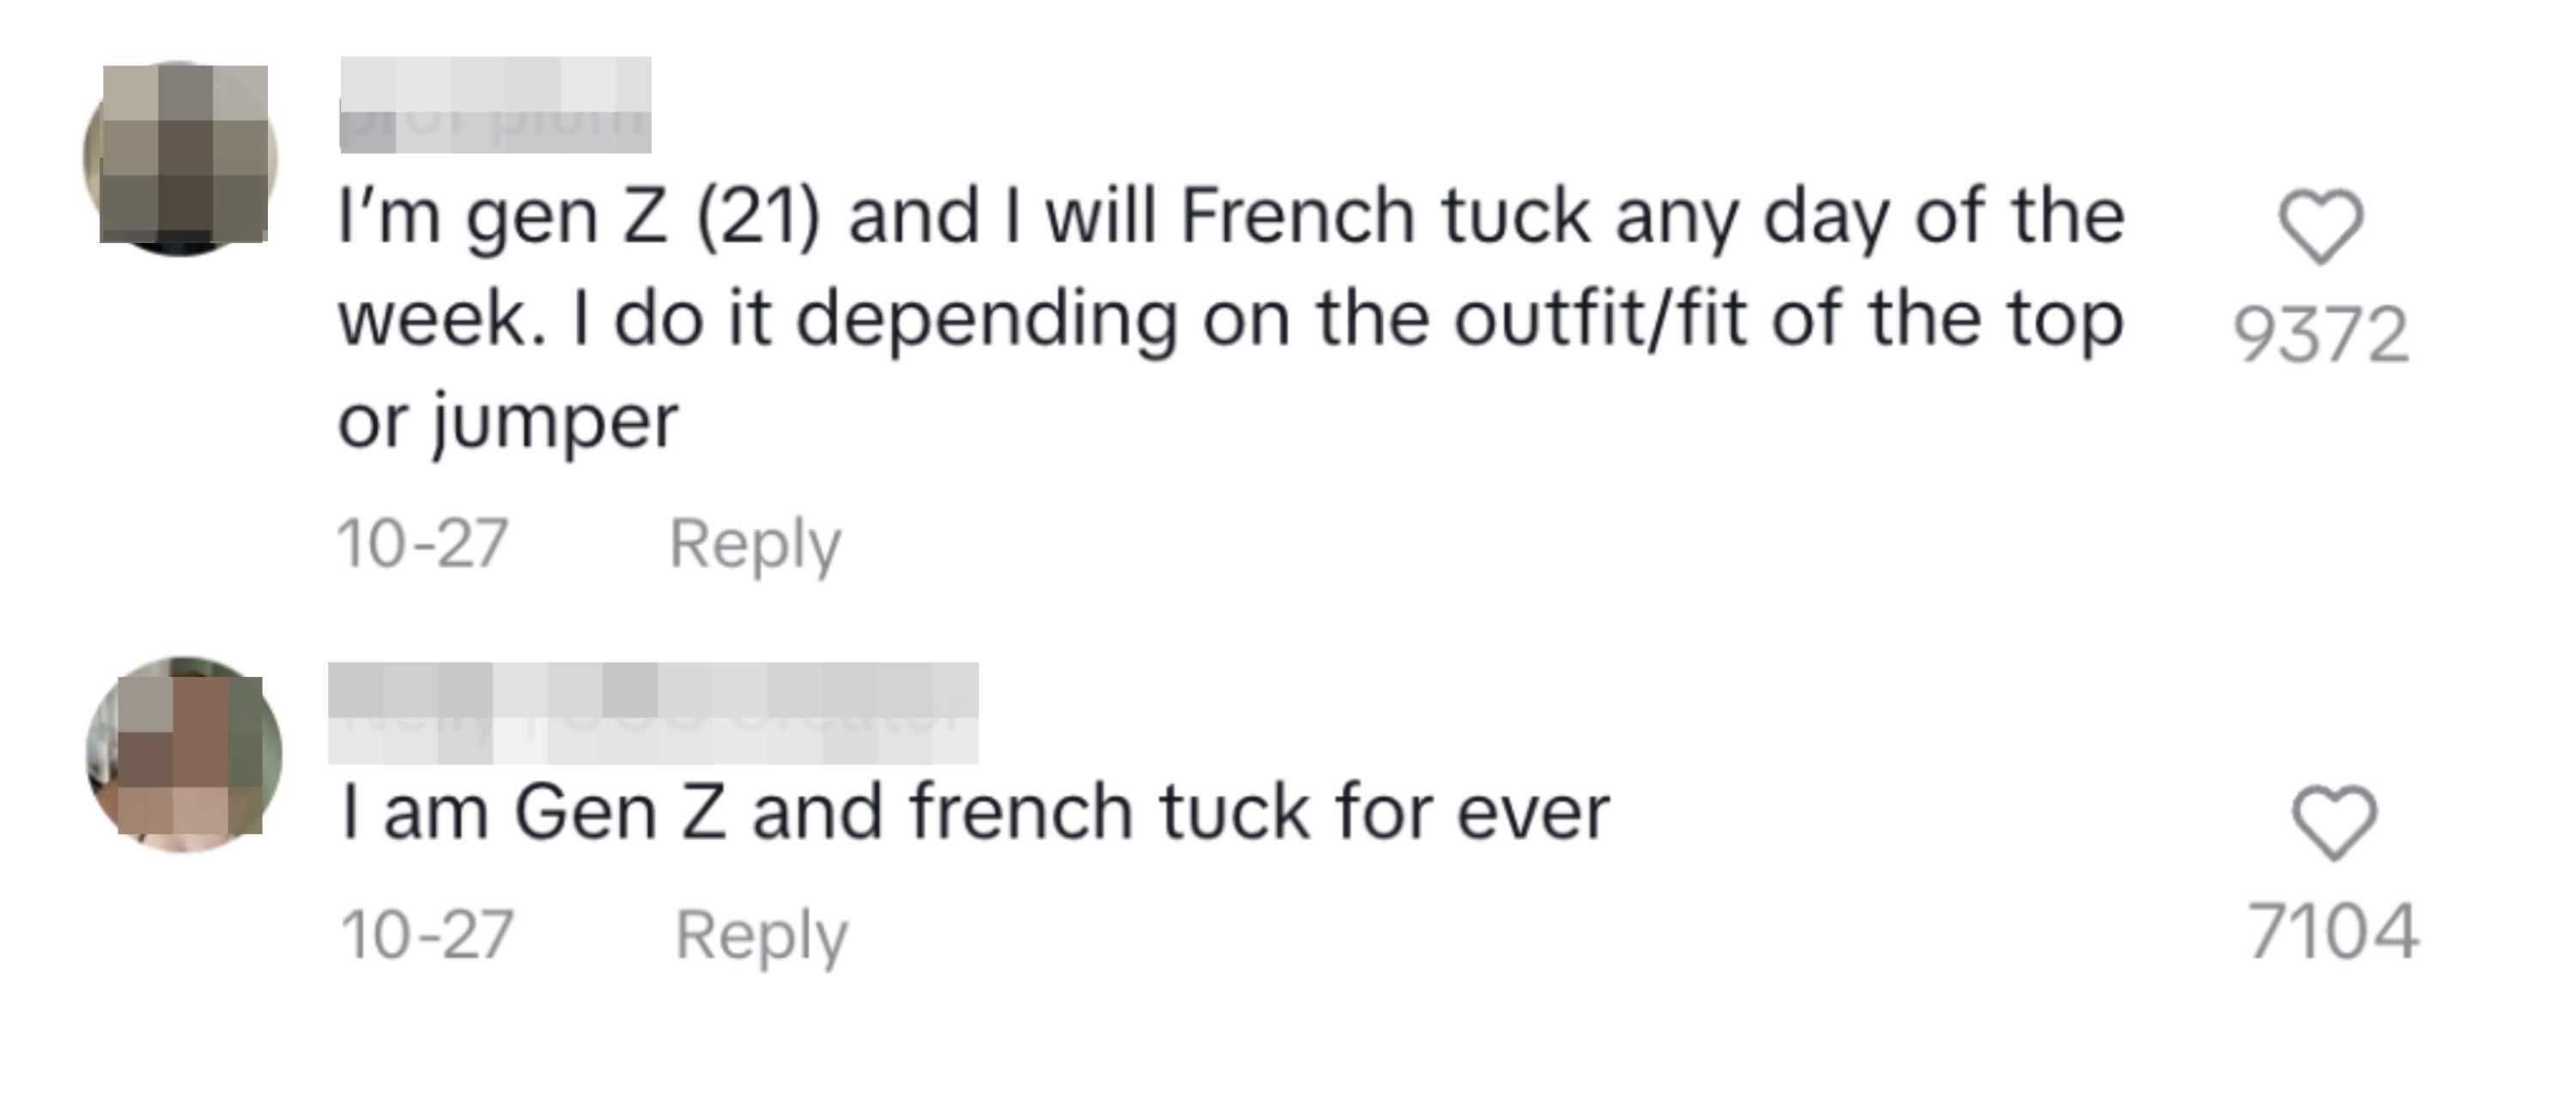 Gen Z&#x27;ers admitting they french/front tuck